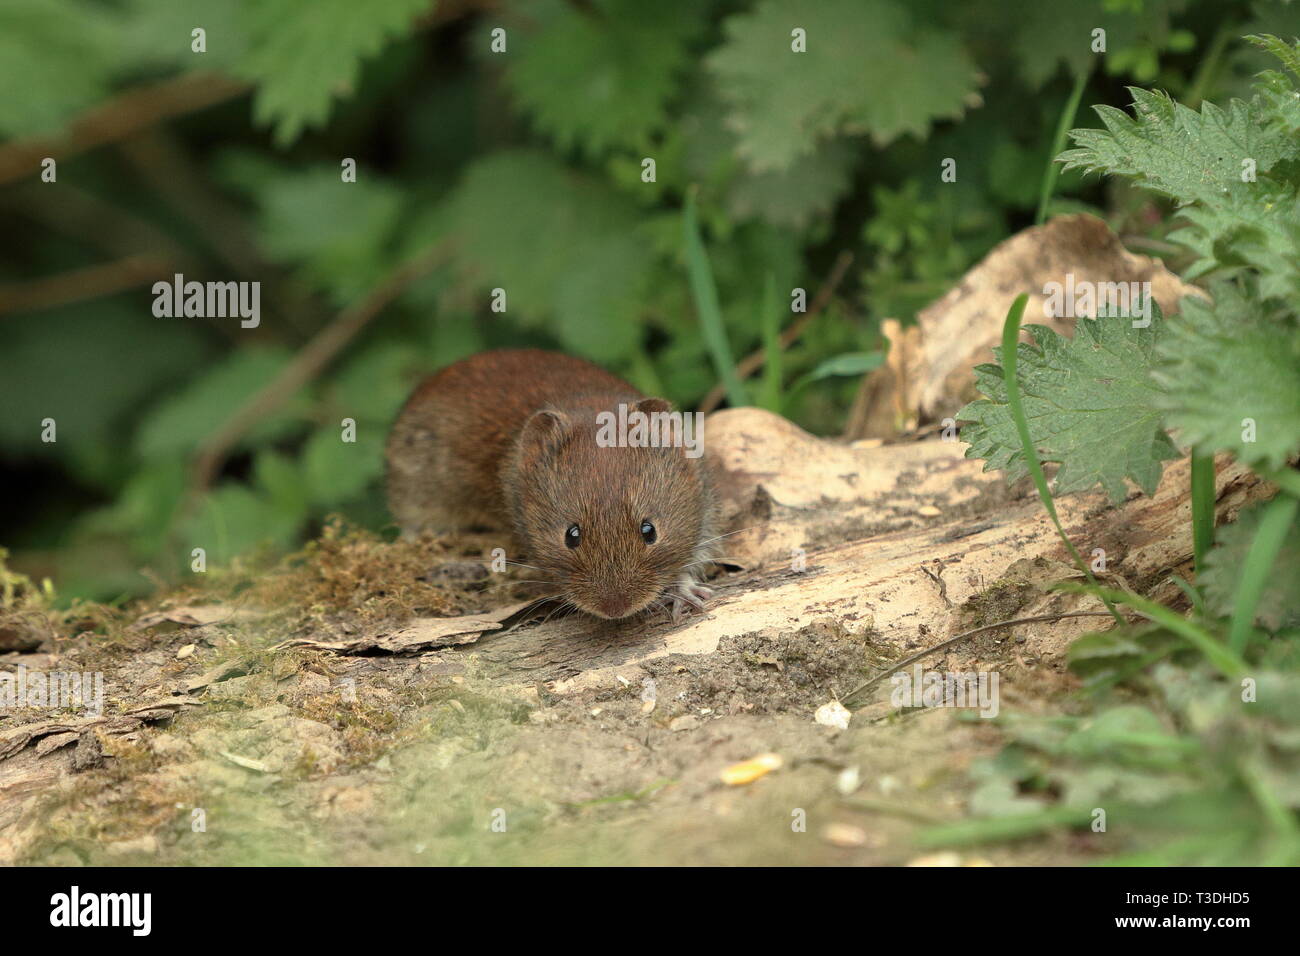 Bank vole (Myodes glareolus) on an old fallen branch Stock Photo